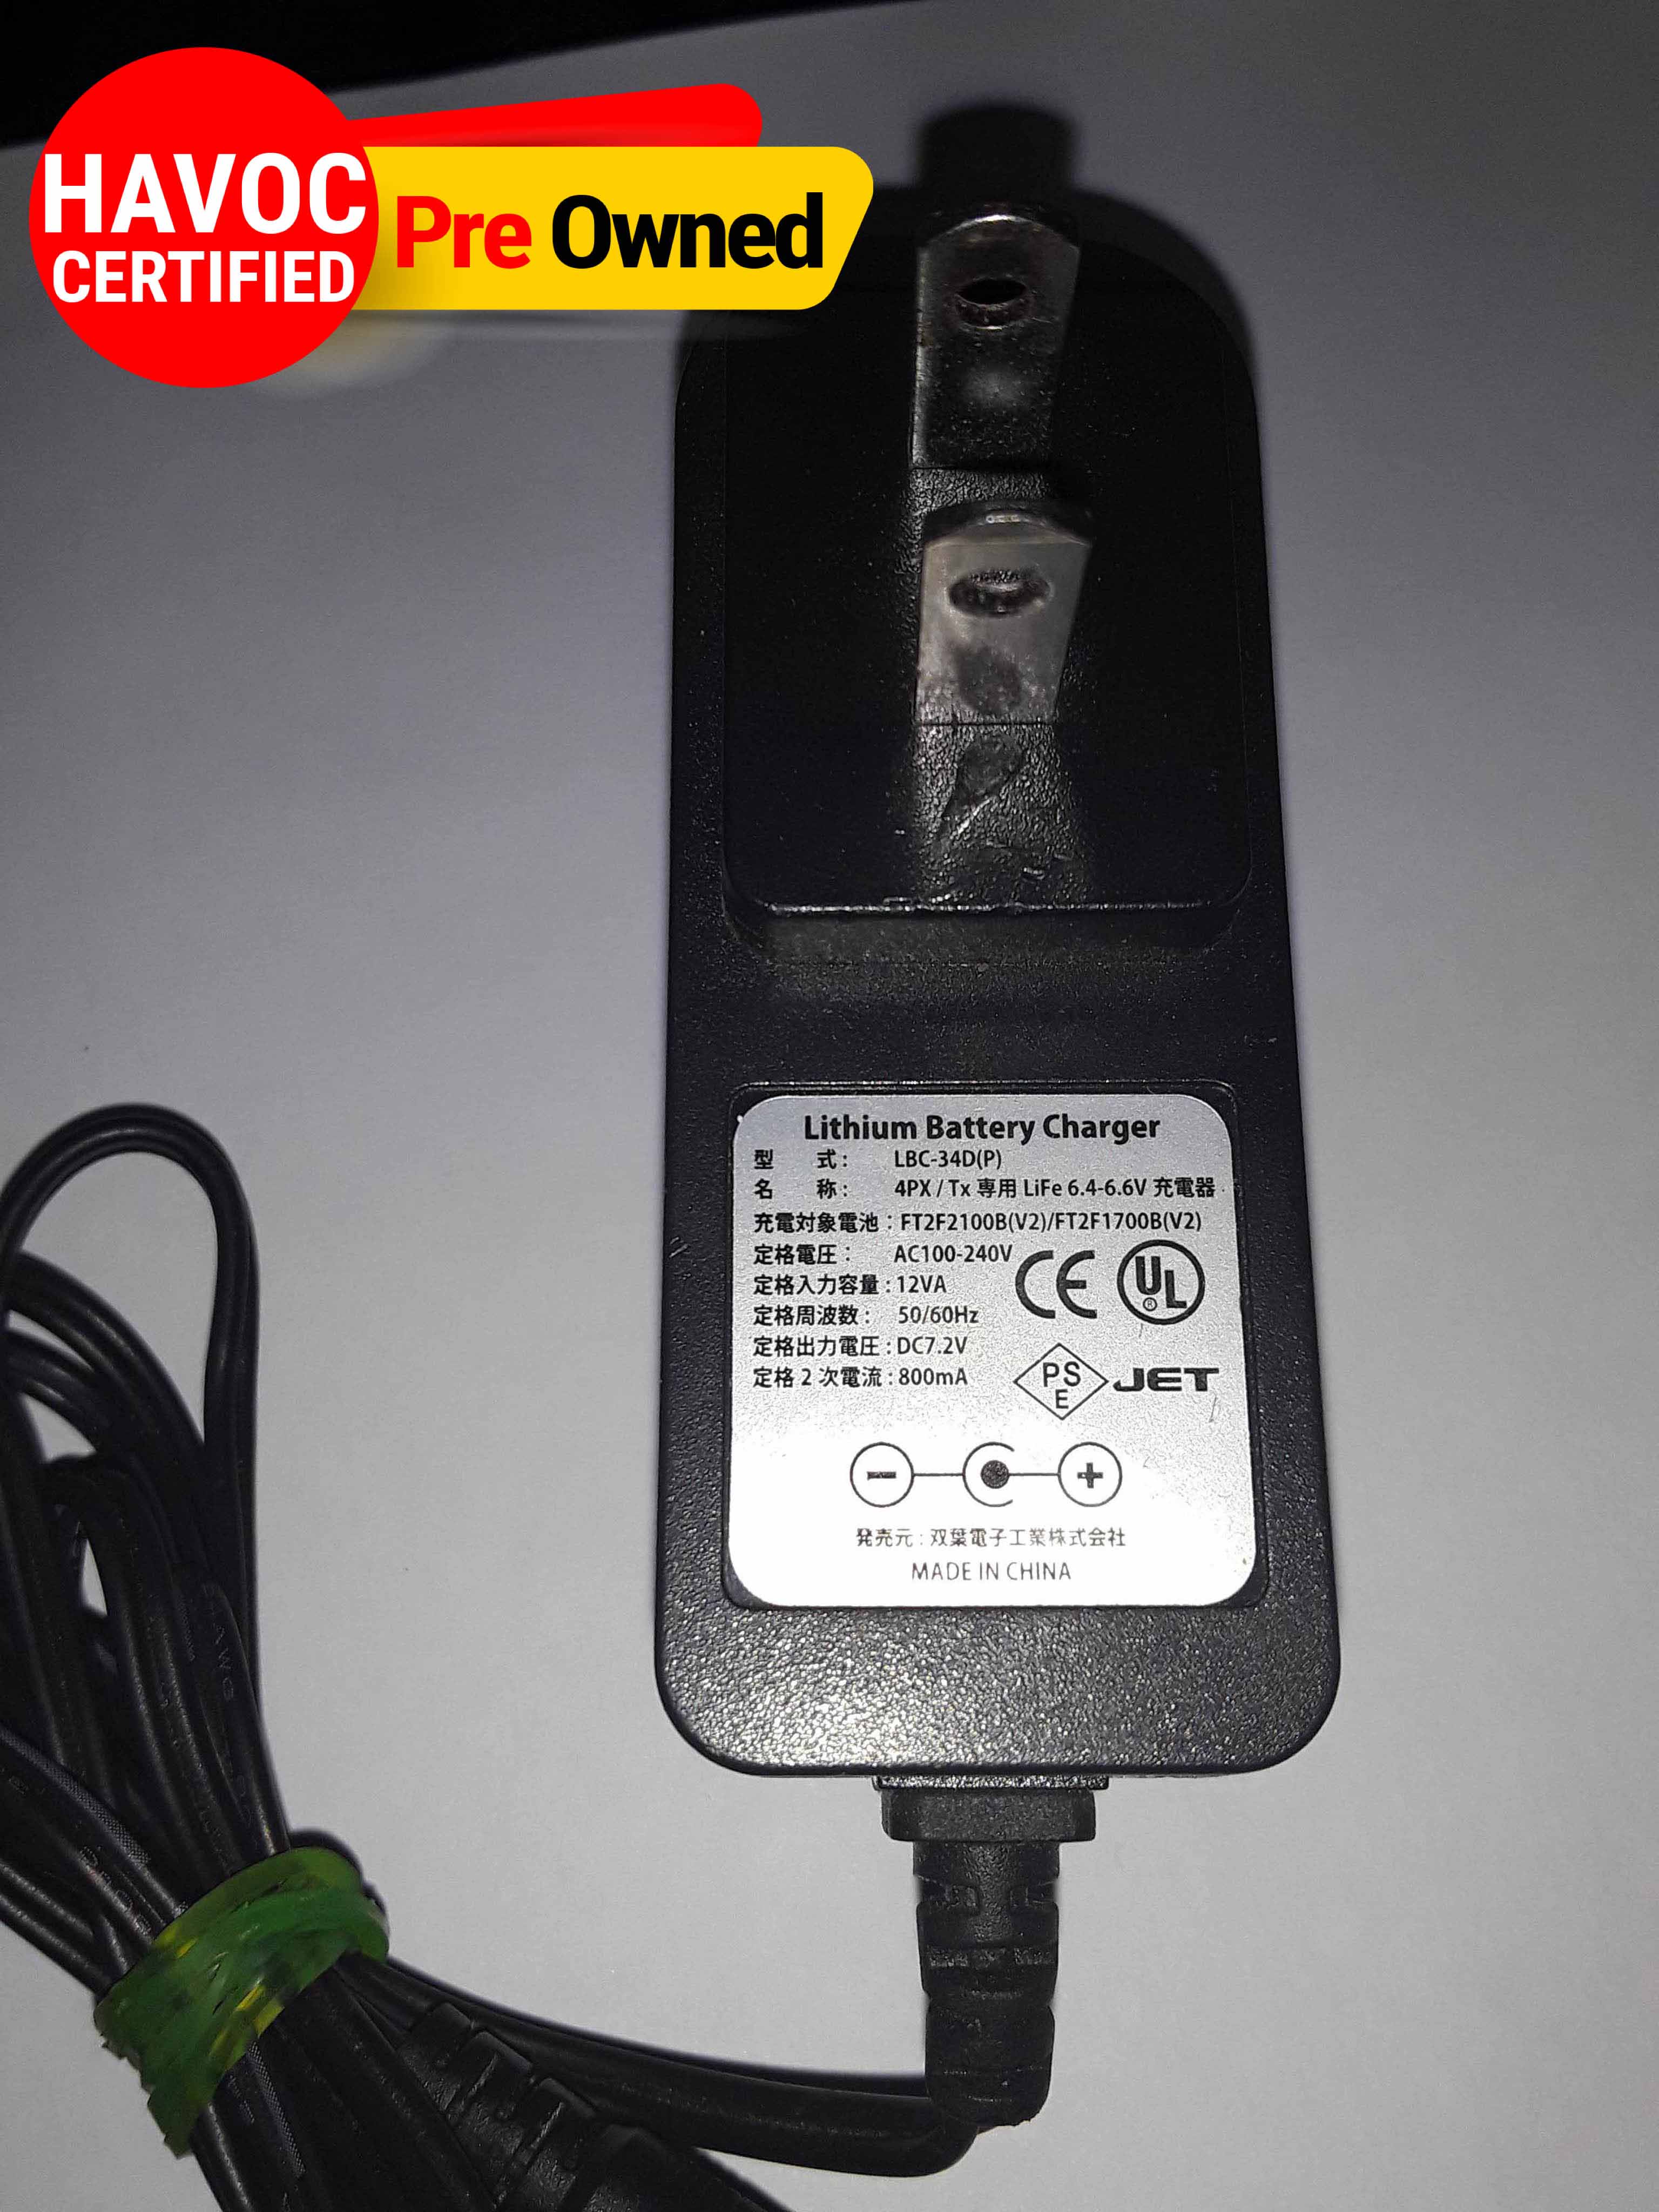 Lithium Battery Charger Lbc-34D(P) Ac230V Dc 7.2V-Quality Pre Owned